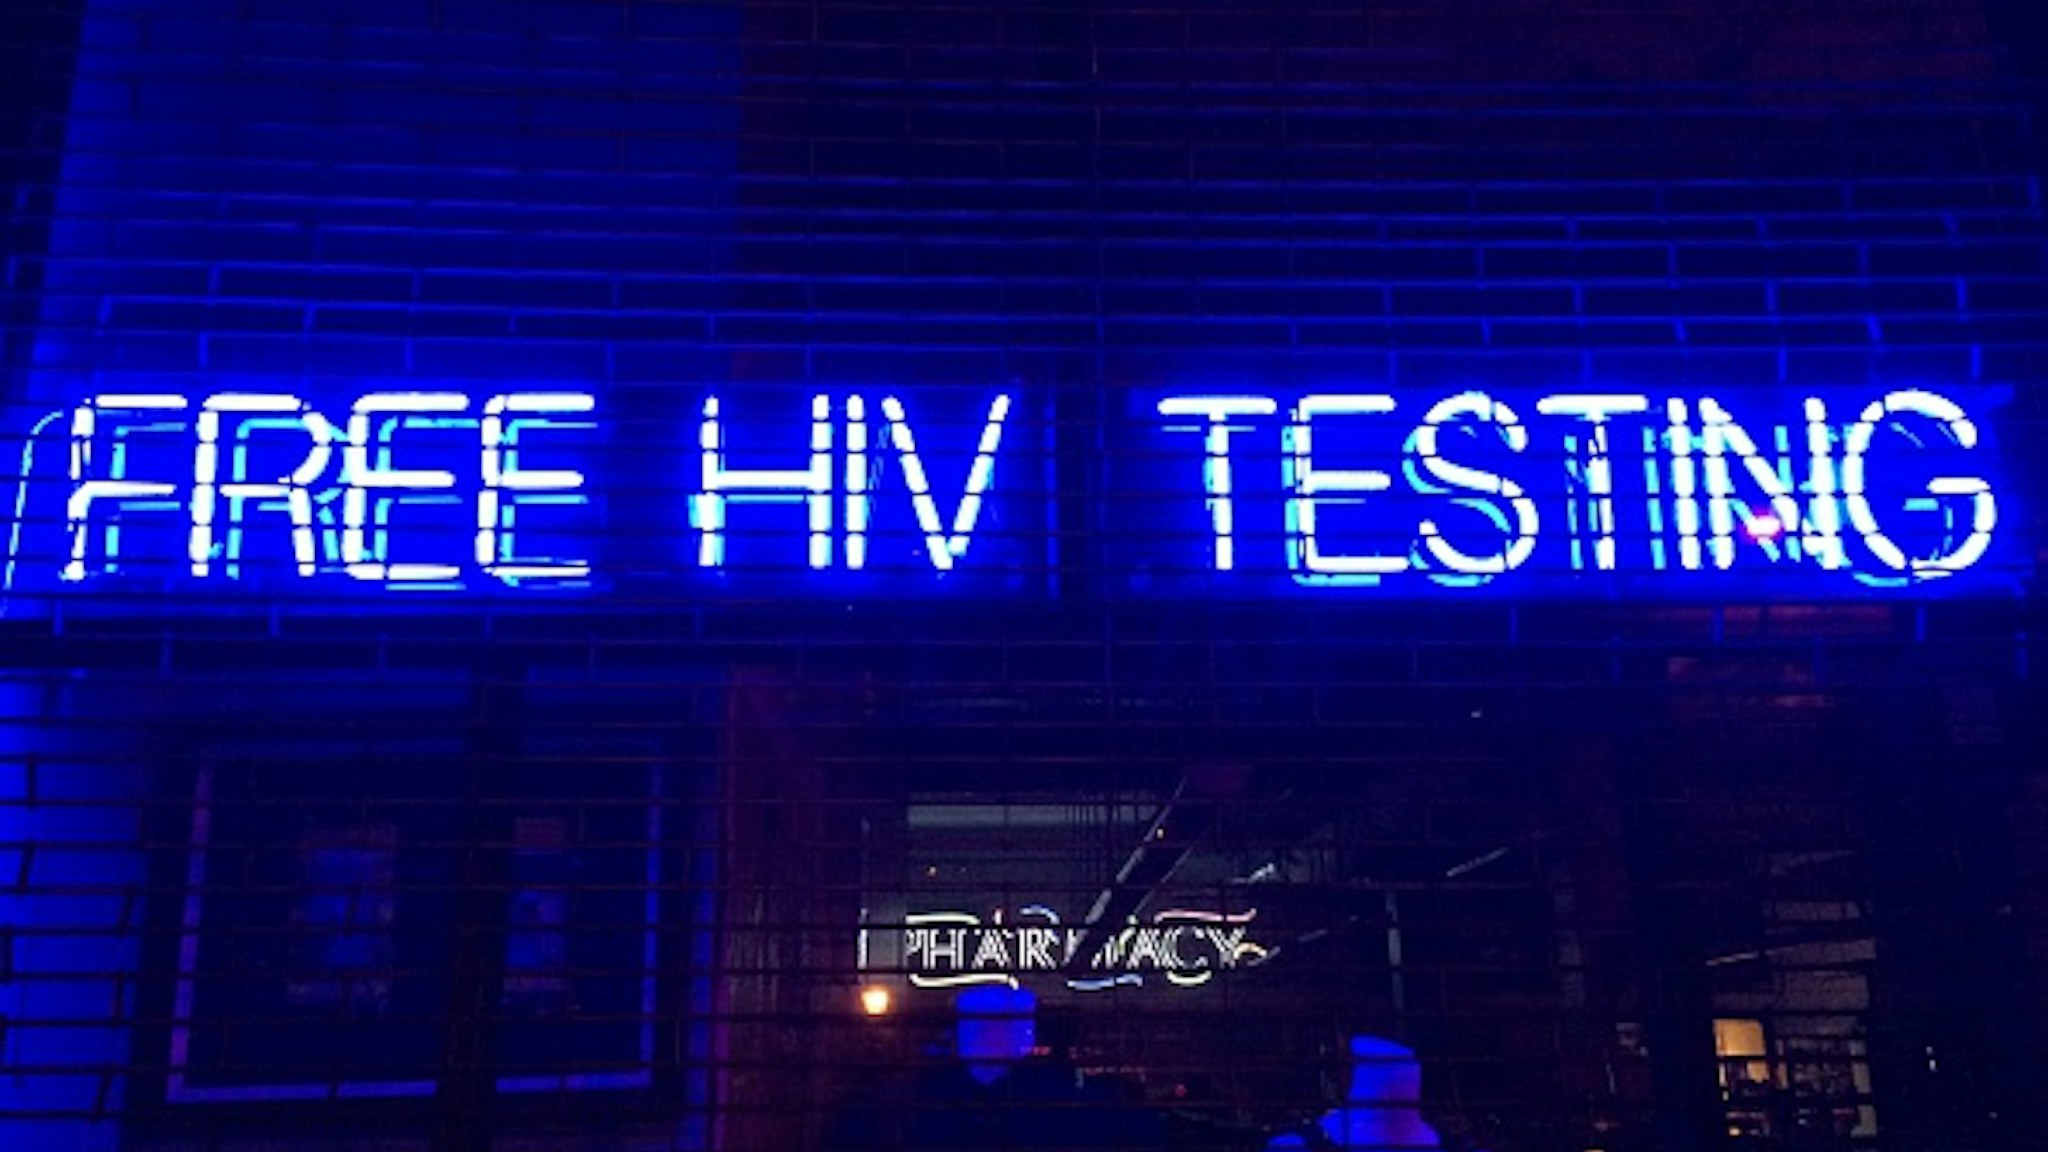 'Free HIV Testing' is spelled out in blue &amp; white neon letters hanging in a storefront window behind security gates in Boerum Hill, Brooklyn, NYC - March 9, 2015